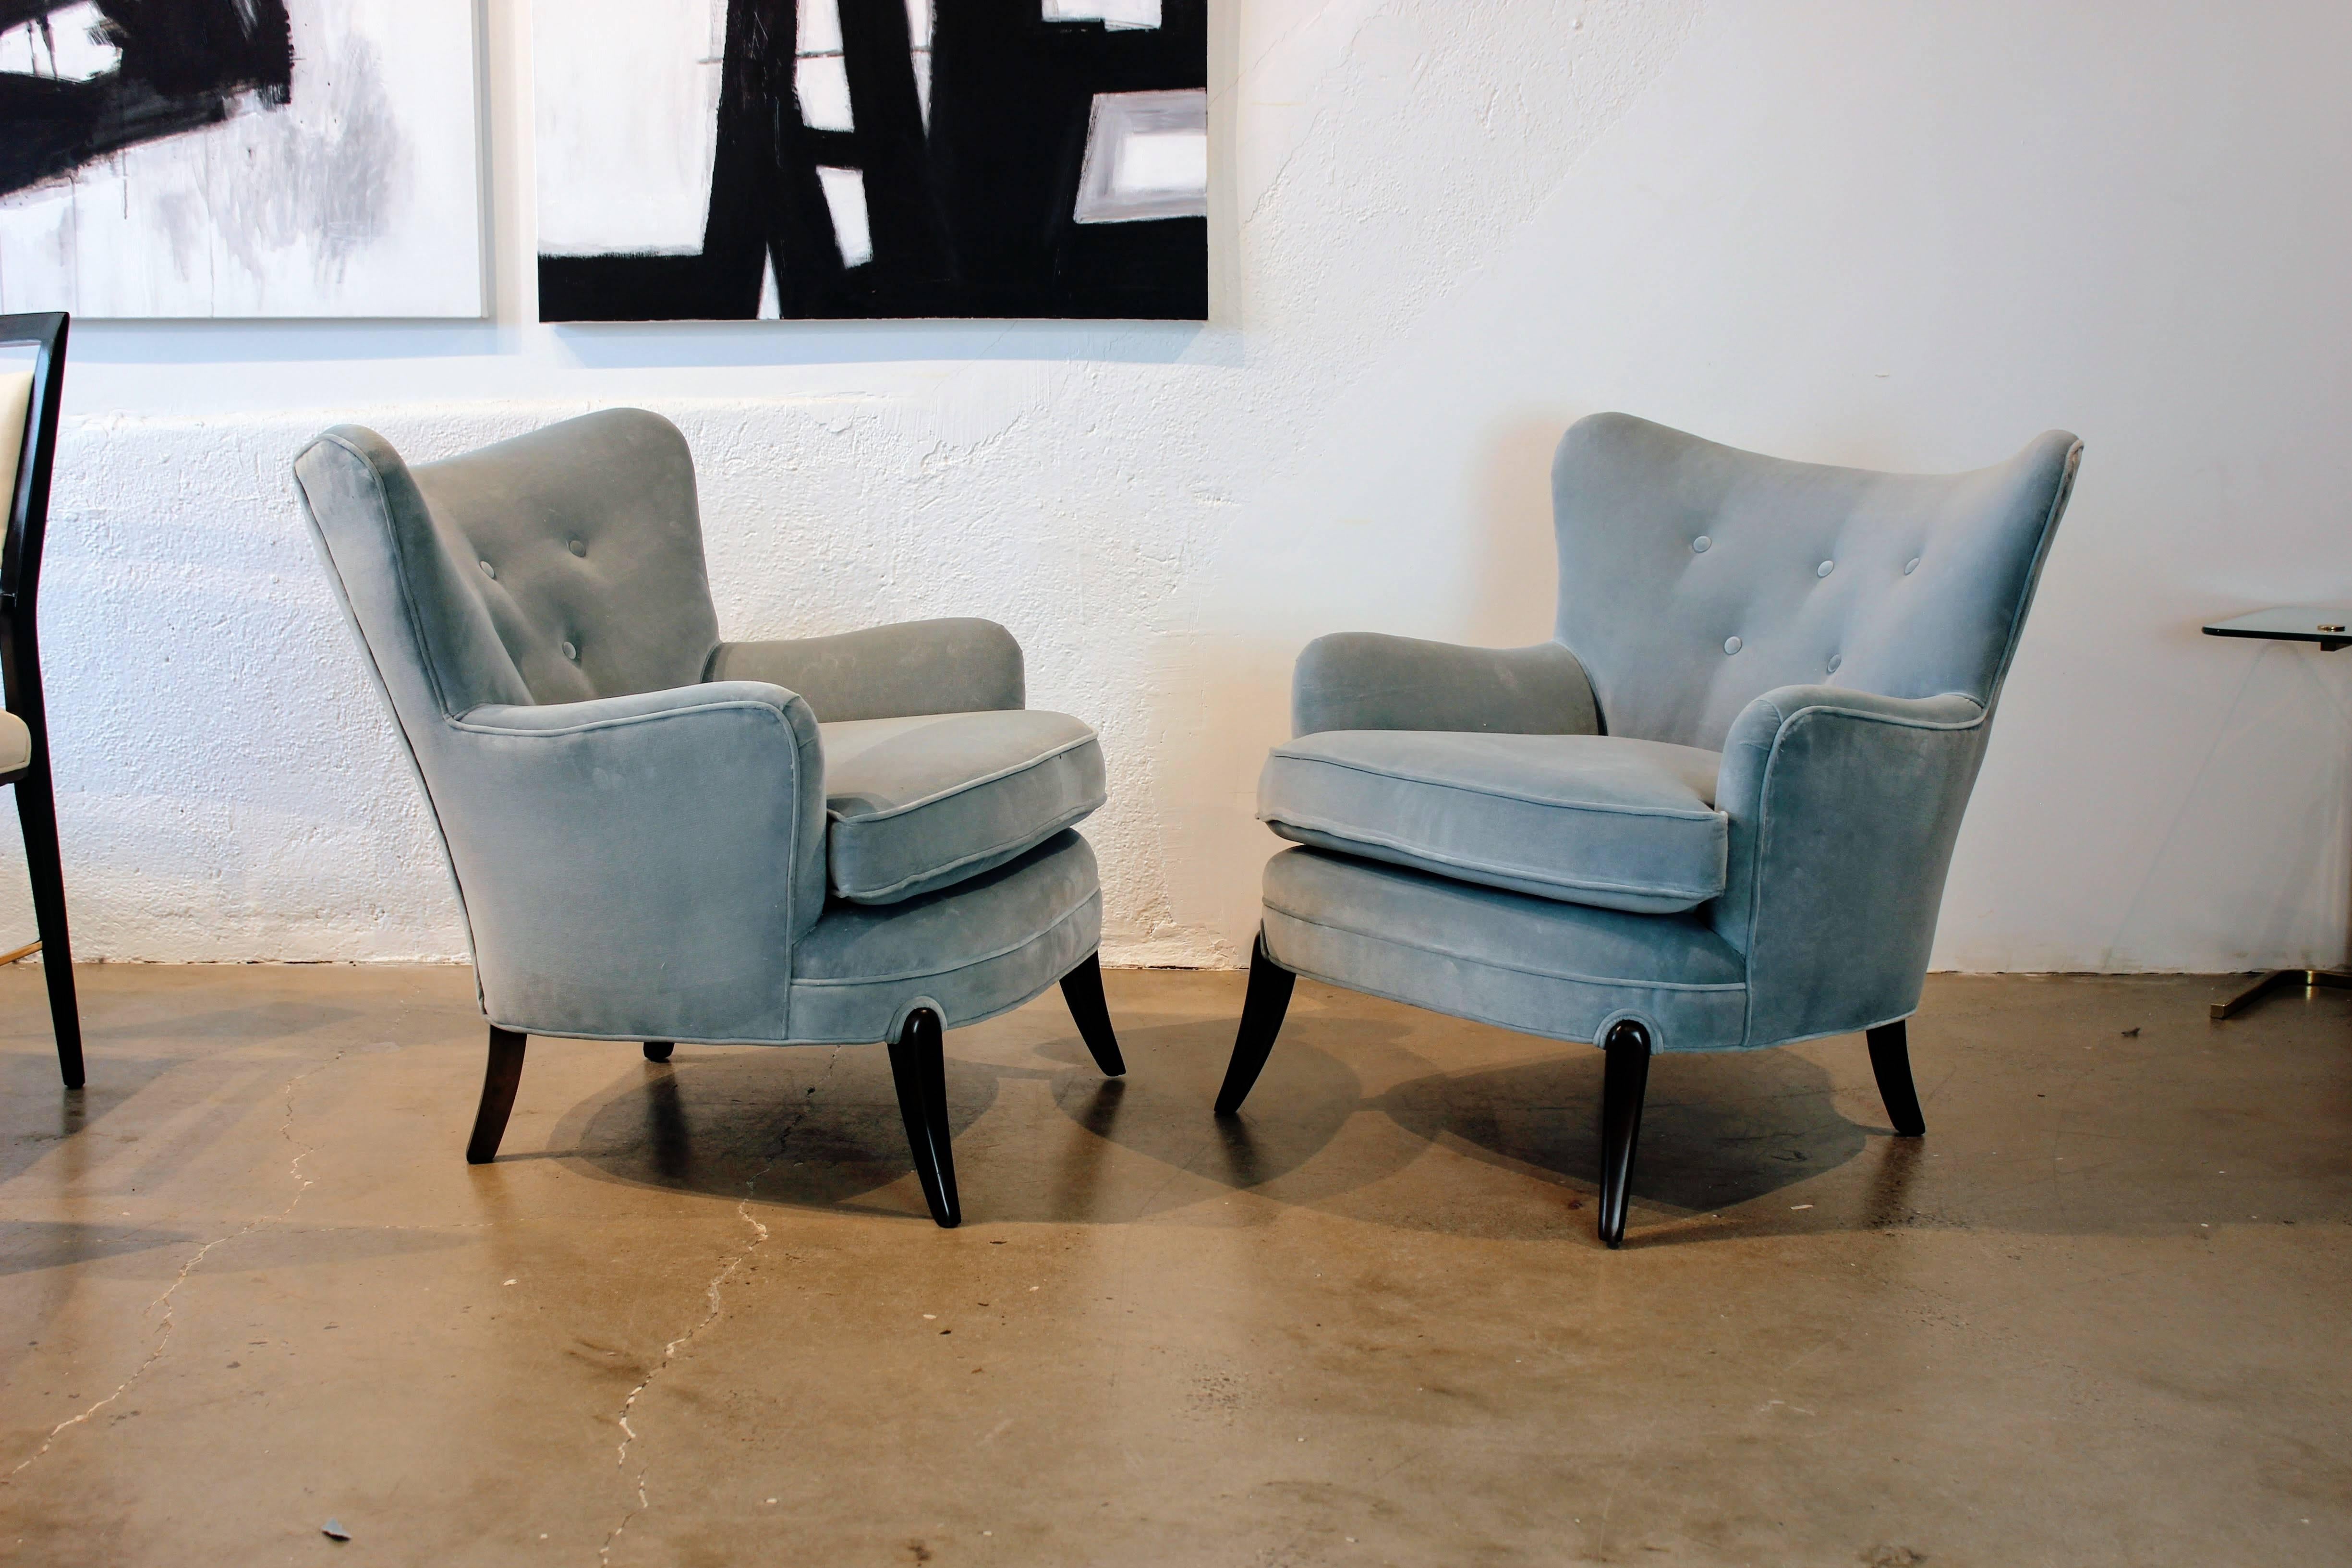 Wicked wing back lounge chairs attributed to Frits Henningsen or Carl Malmsten, 1950s. Sculptural sabre legs. Fully restored and in excellent condition. Very comfortable!

See this item in our private NYC showroom! Refine limited is located in the